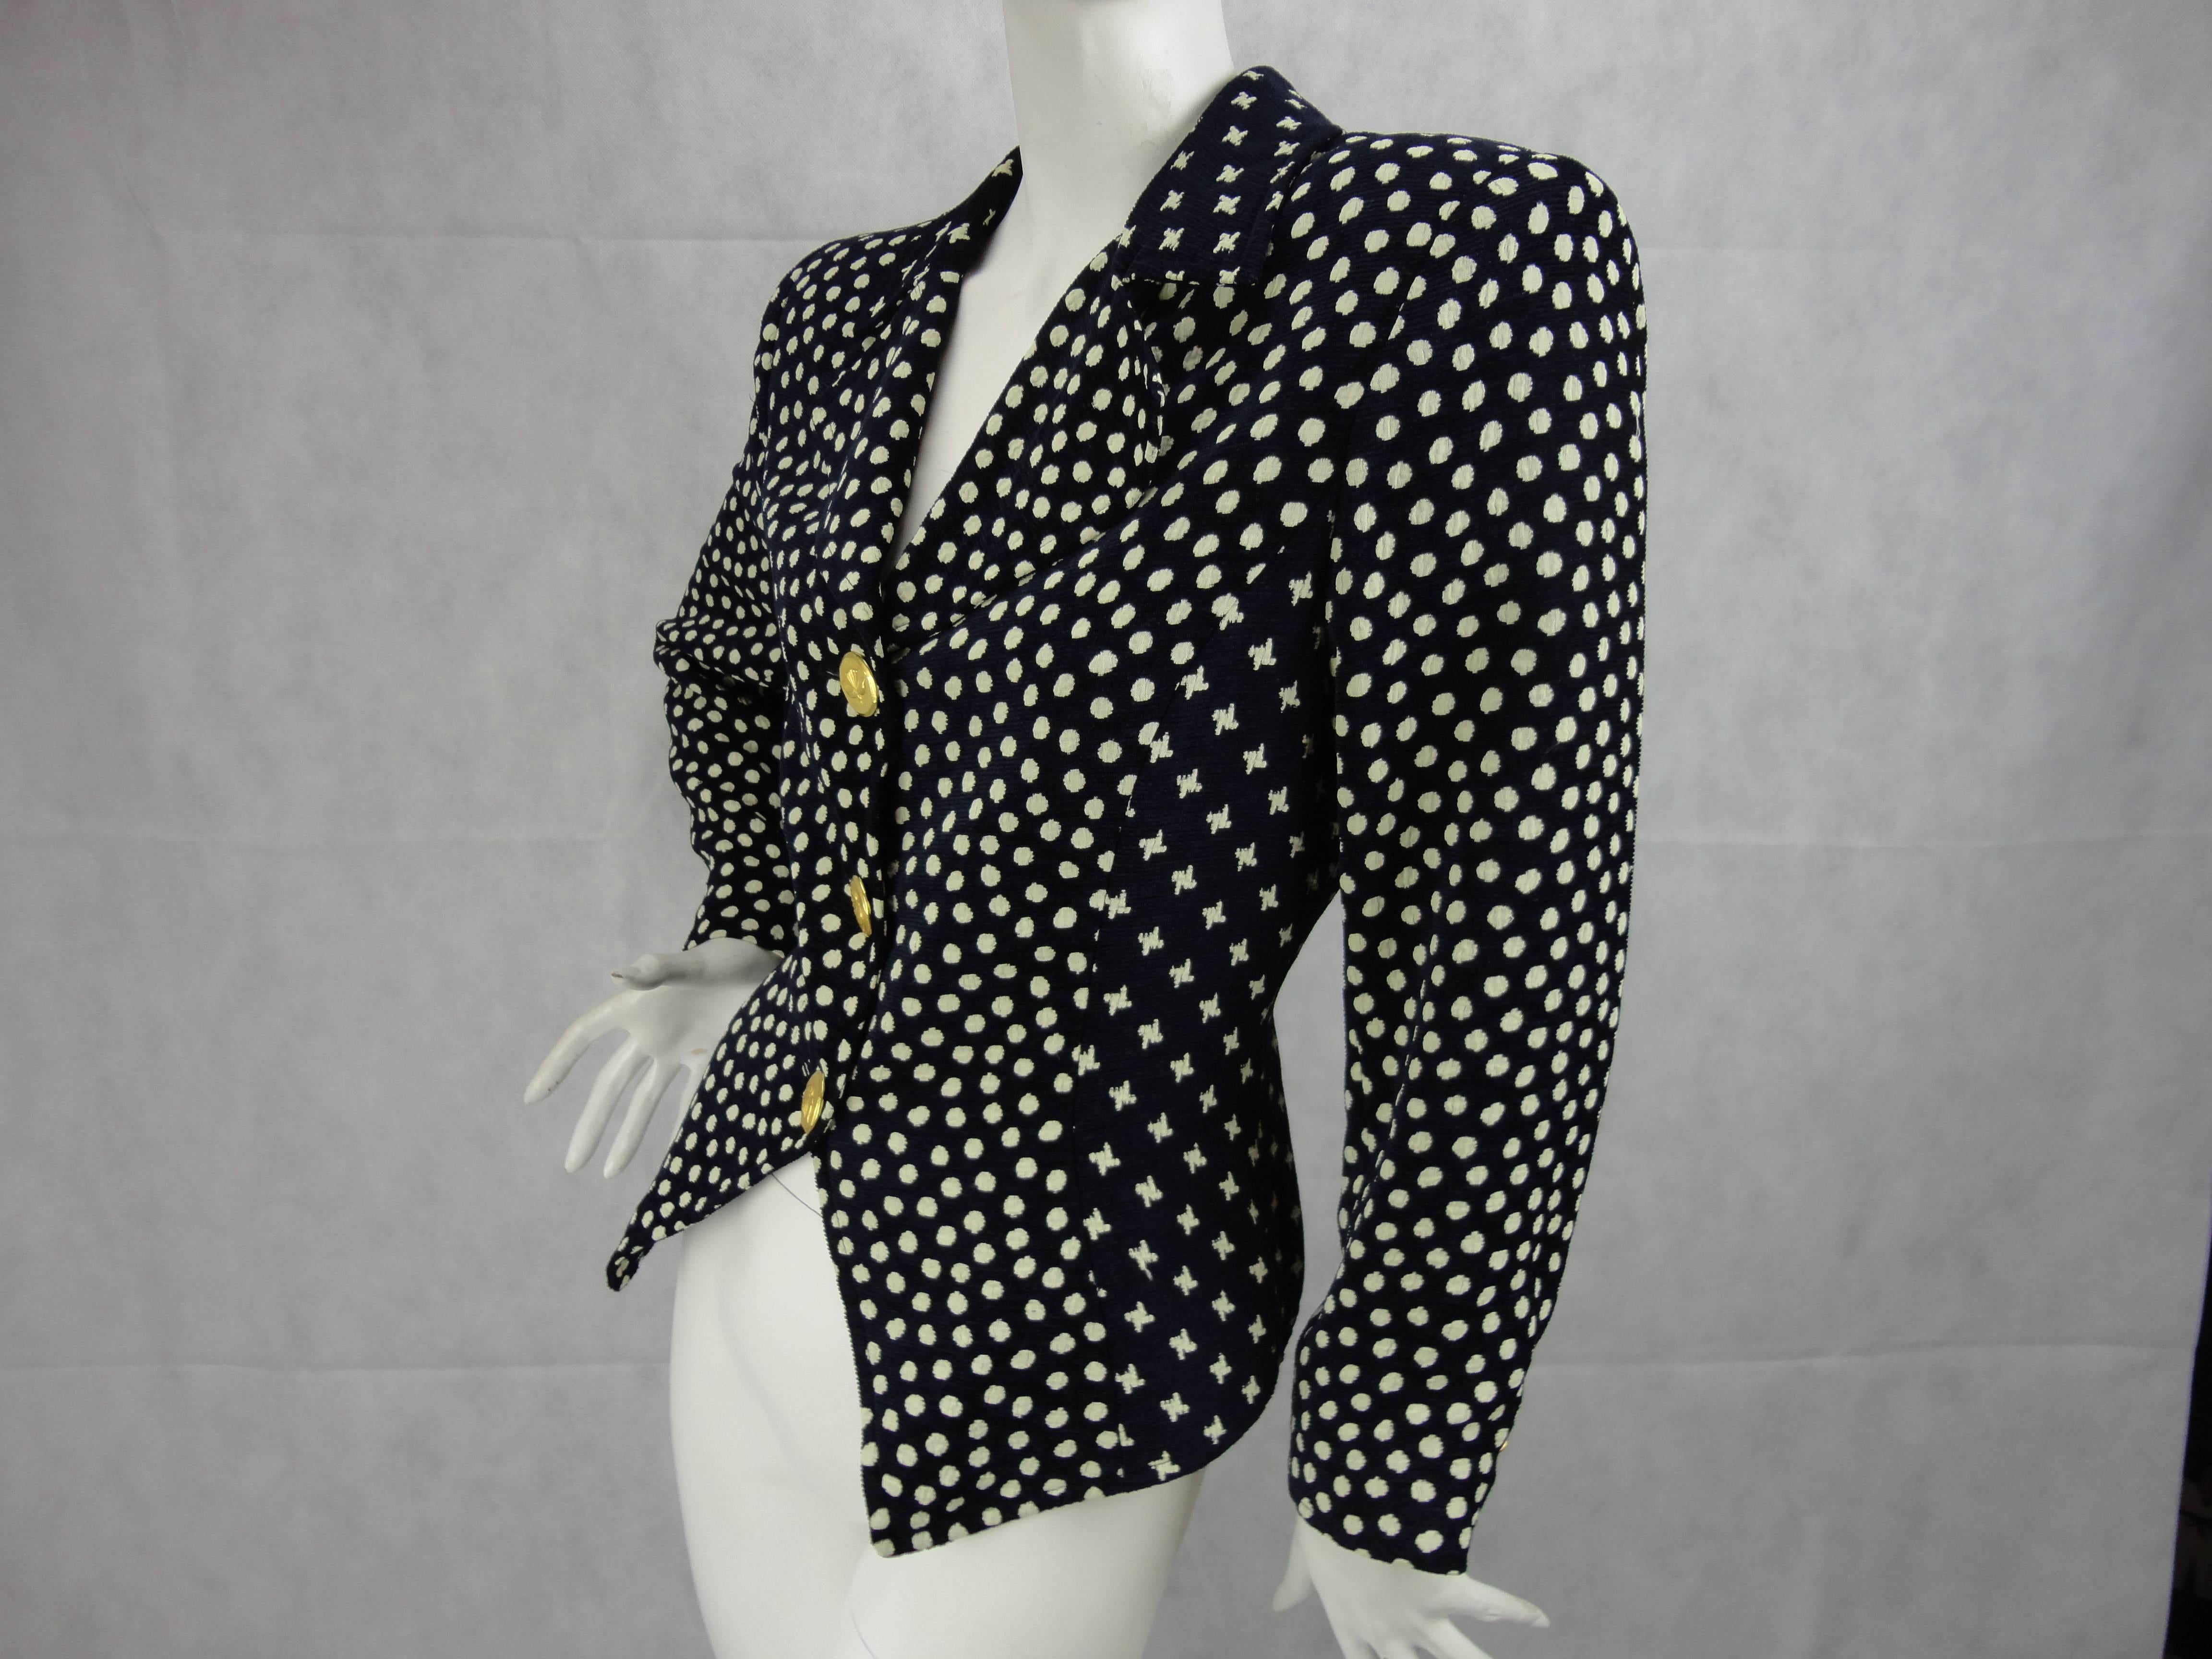 Christian Lacroix navy blue blazer with dots and stars print, circa 1989.

Beautiful gold buttons with birds.

Amazing condition as it was never used.

Measurements:
Shoulder: 43 cm
Chest: 46 cm
Sleeve: 53 cm
Length: 58 cm